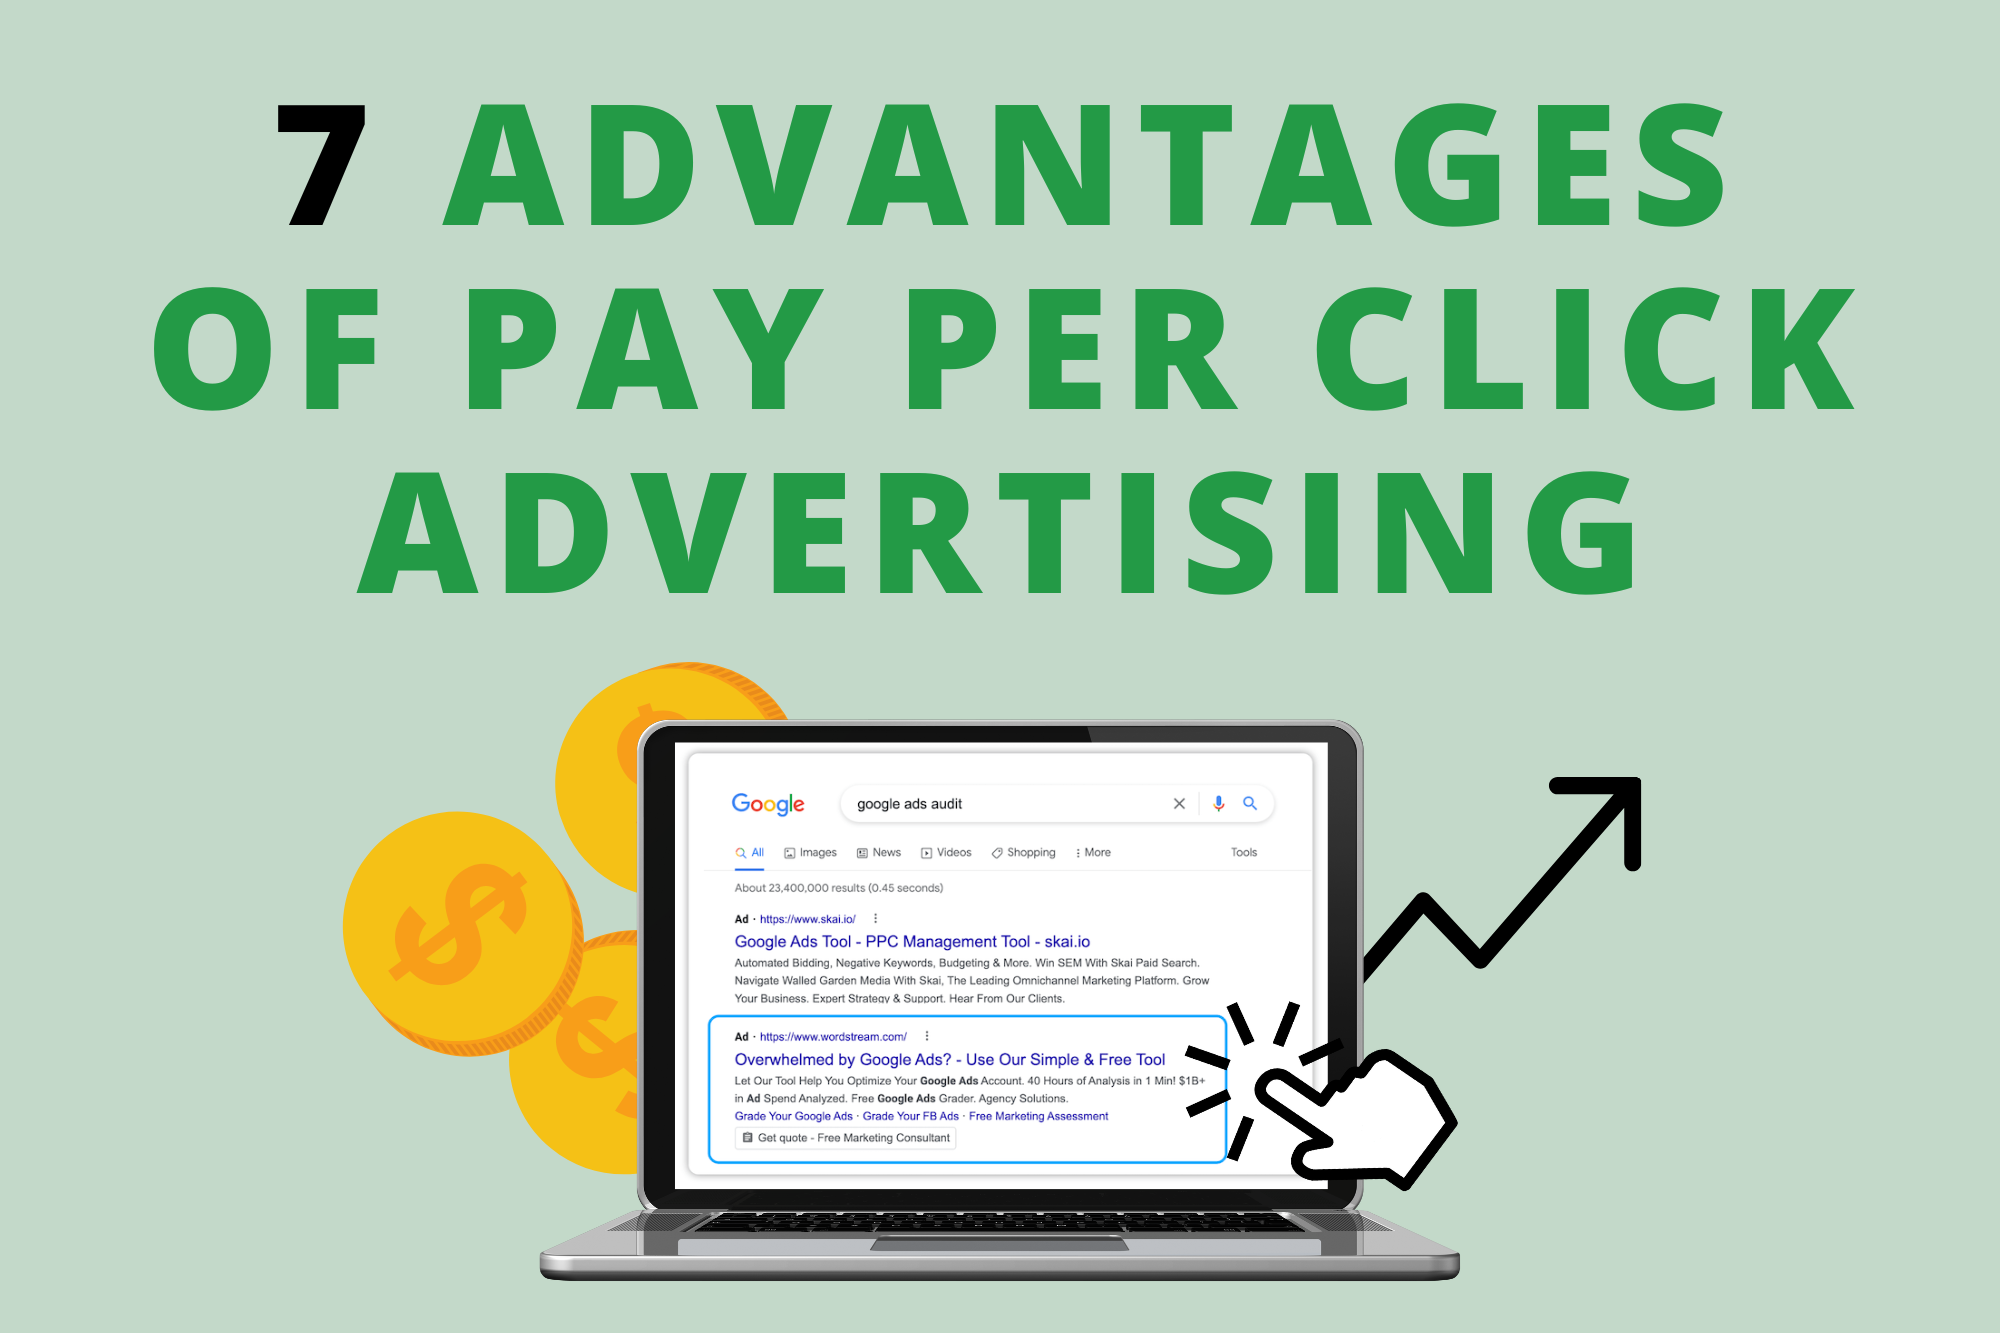 7 Advantages of Pay Per Click Advertising for Contractors